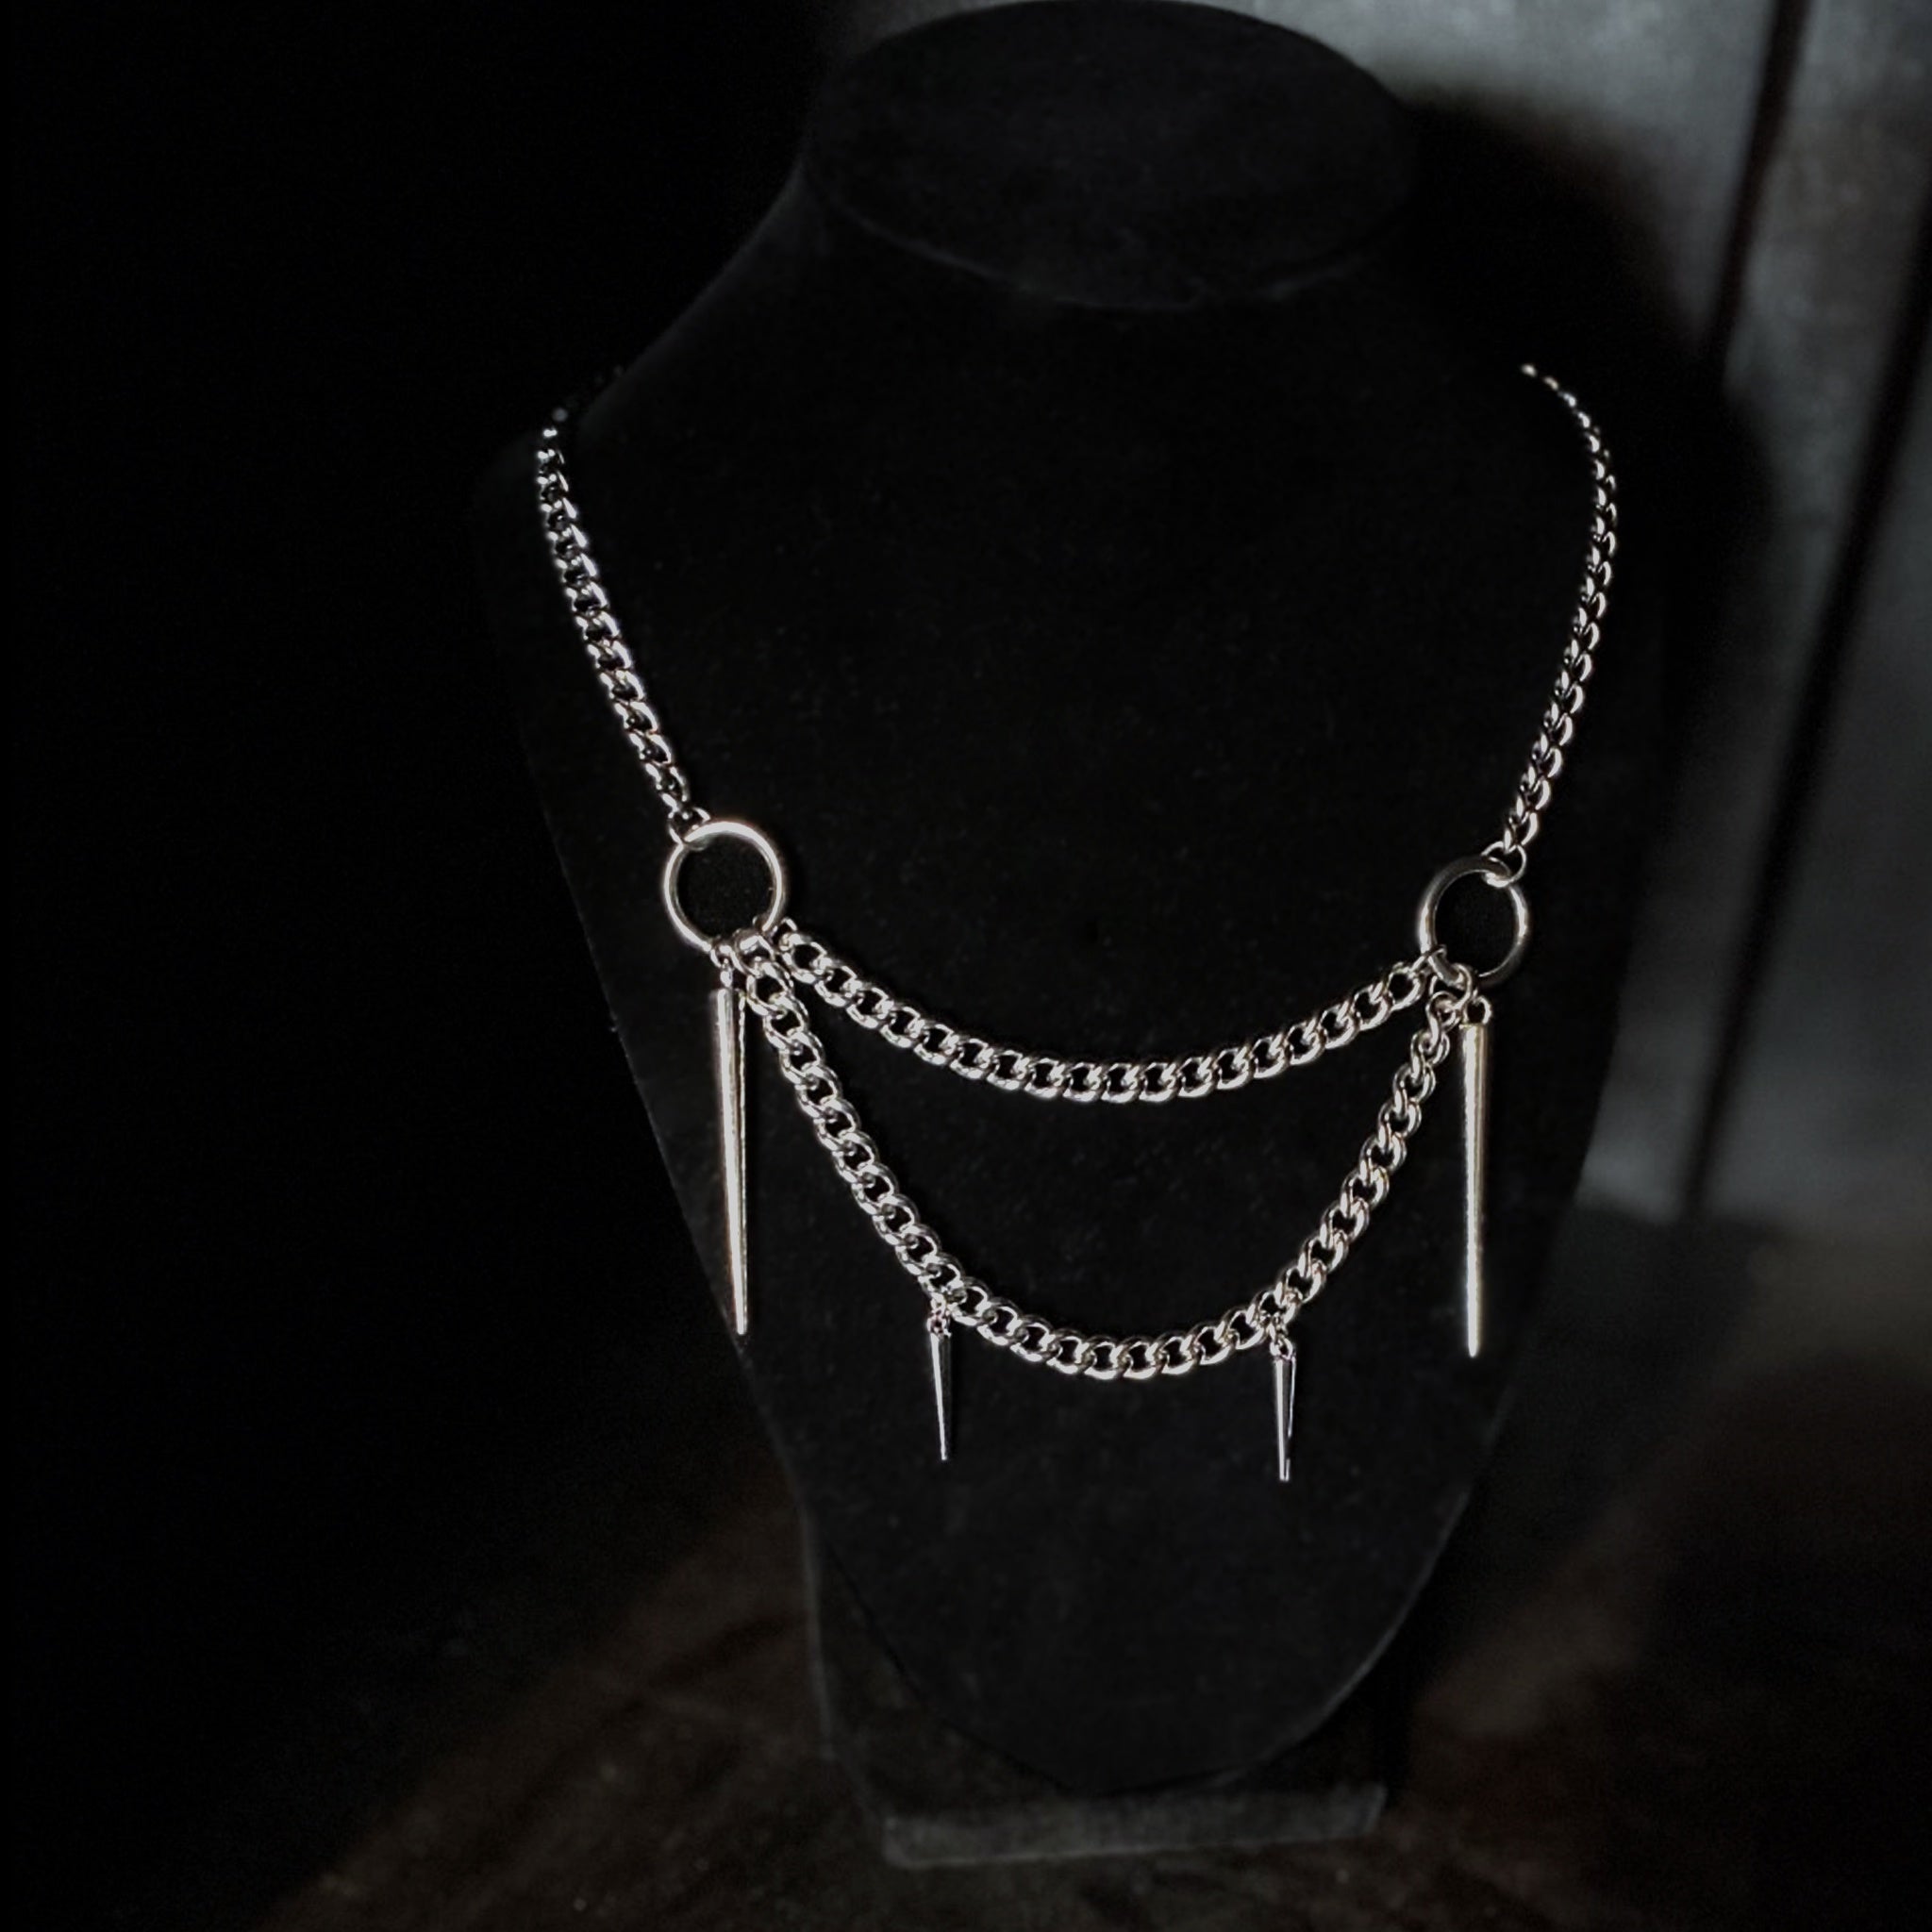 Chain Spike necklace